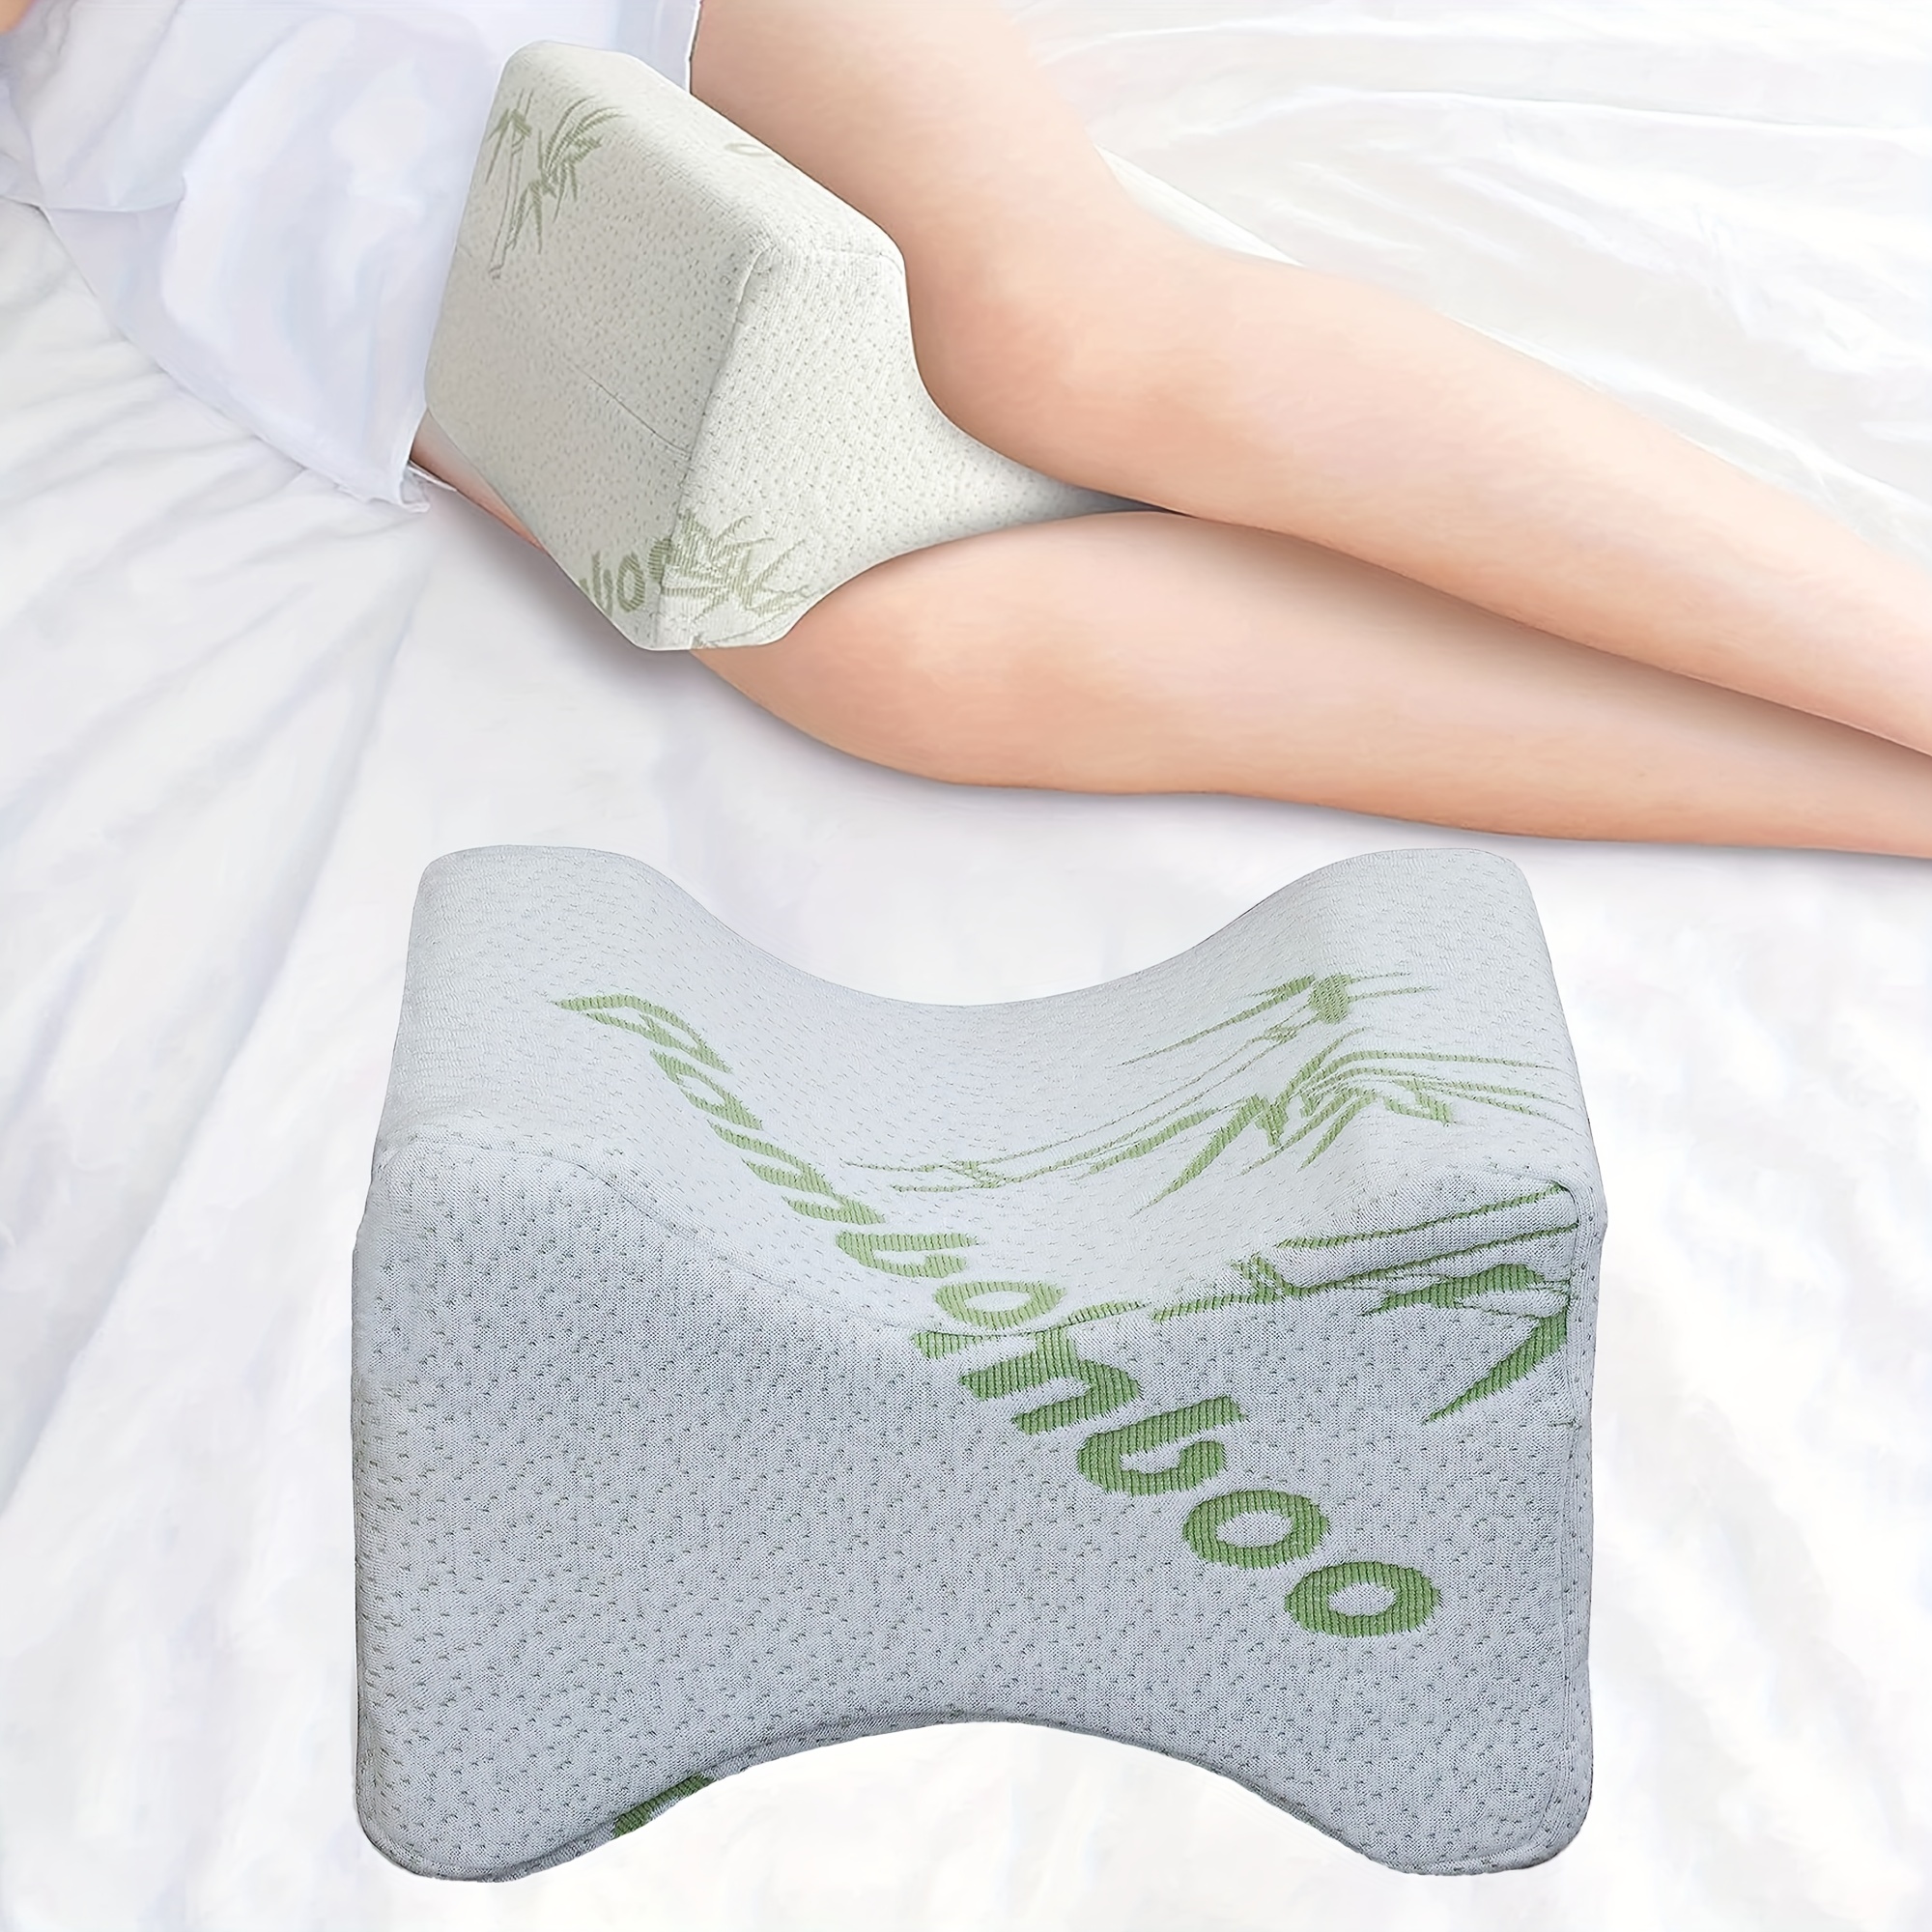 Cooling Knee Pillow for Side Sleepers, Gel Memory Foam Leg Pillows for  Sleeping with Ice Silk Cover and Strap, Knee Pillow for Back Hip Pain,  Spine